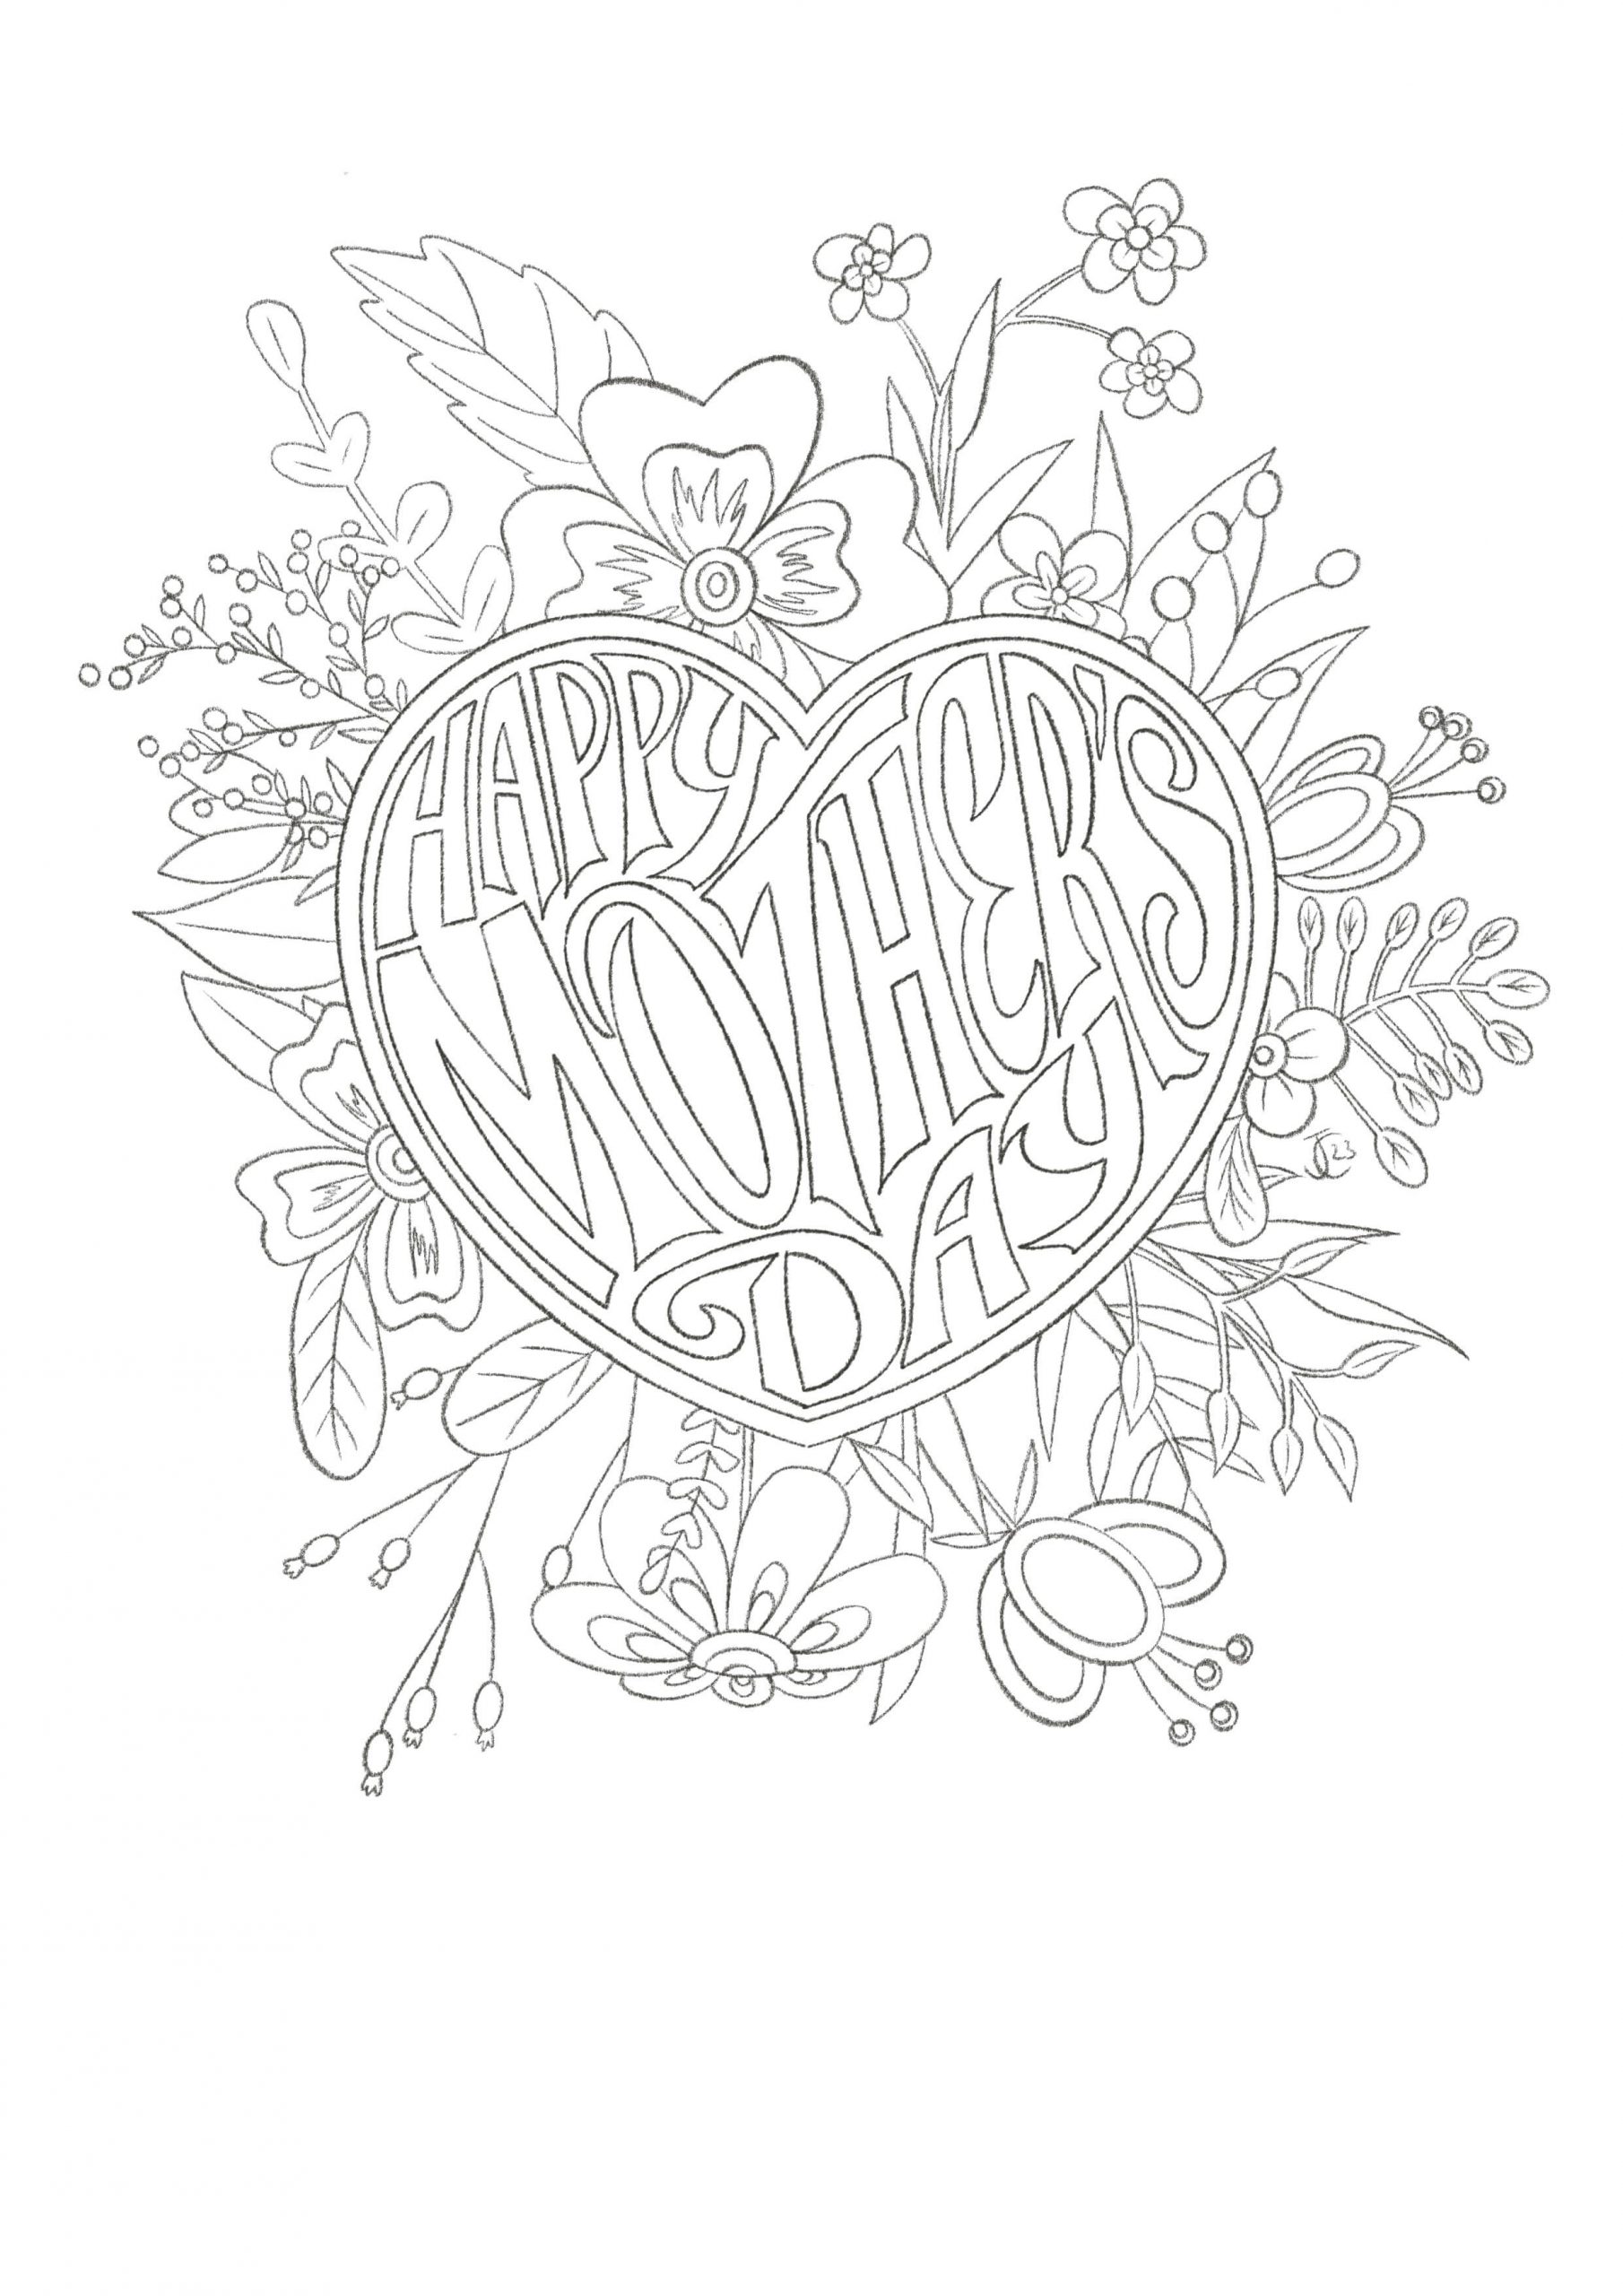 Free colouring pages from colouring heaven colouring heaven